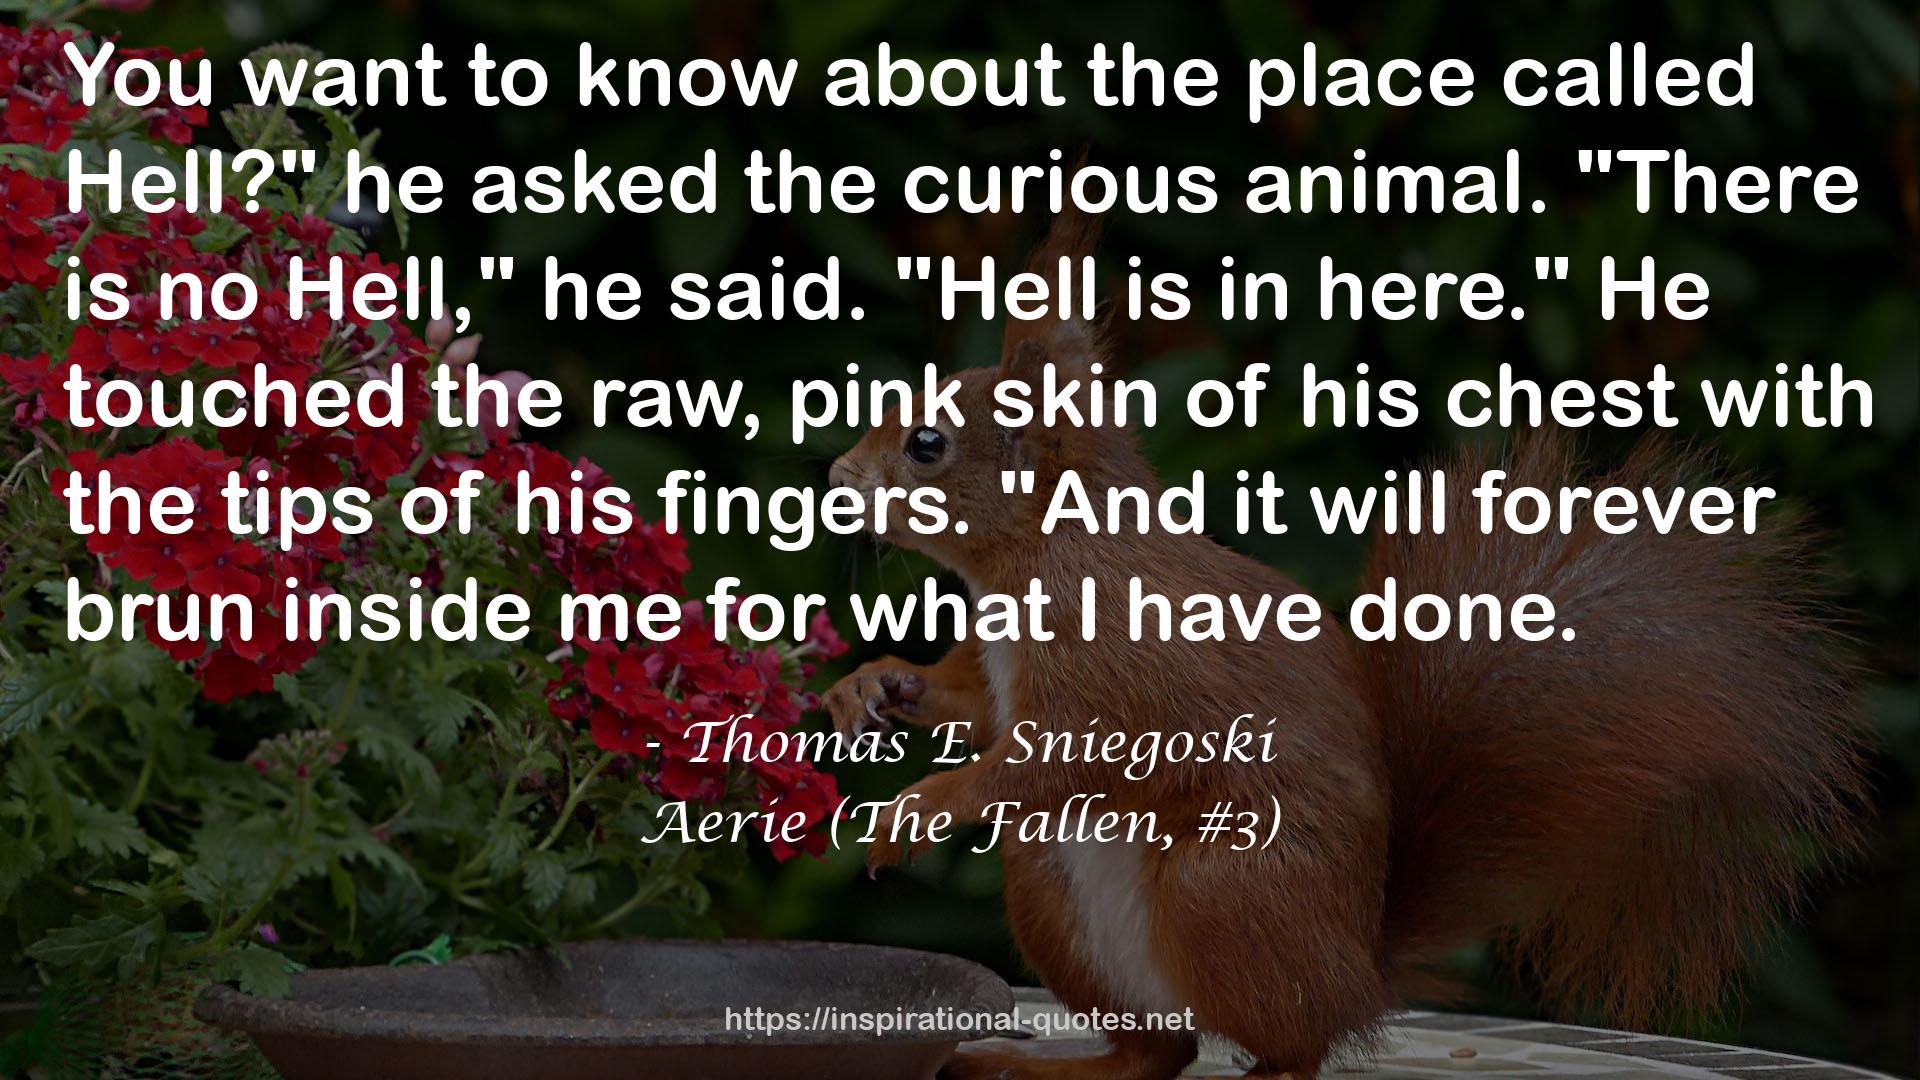 Aerie (The Fallen, #3) QUOTES